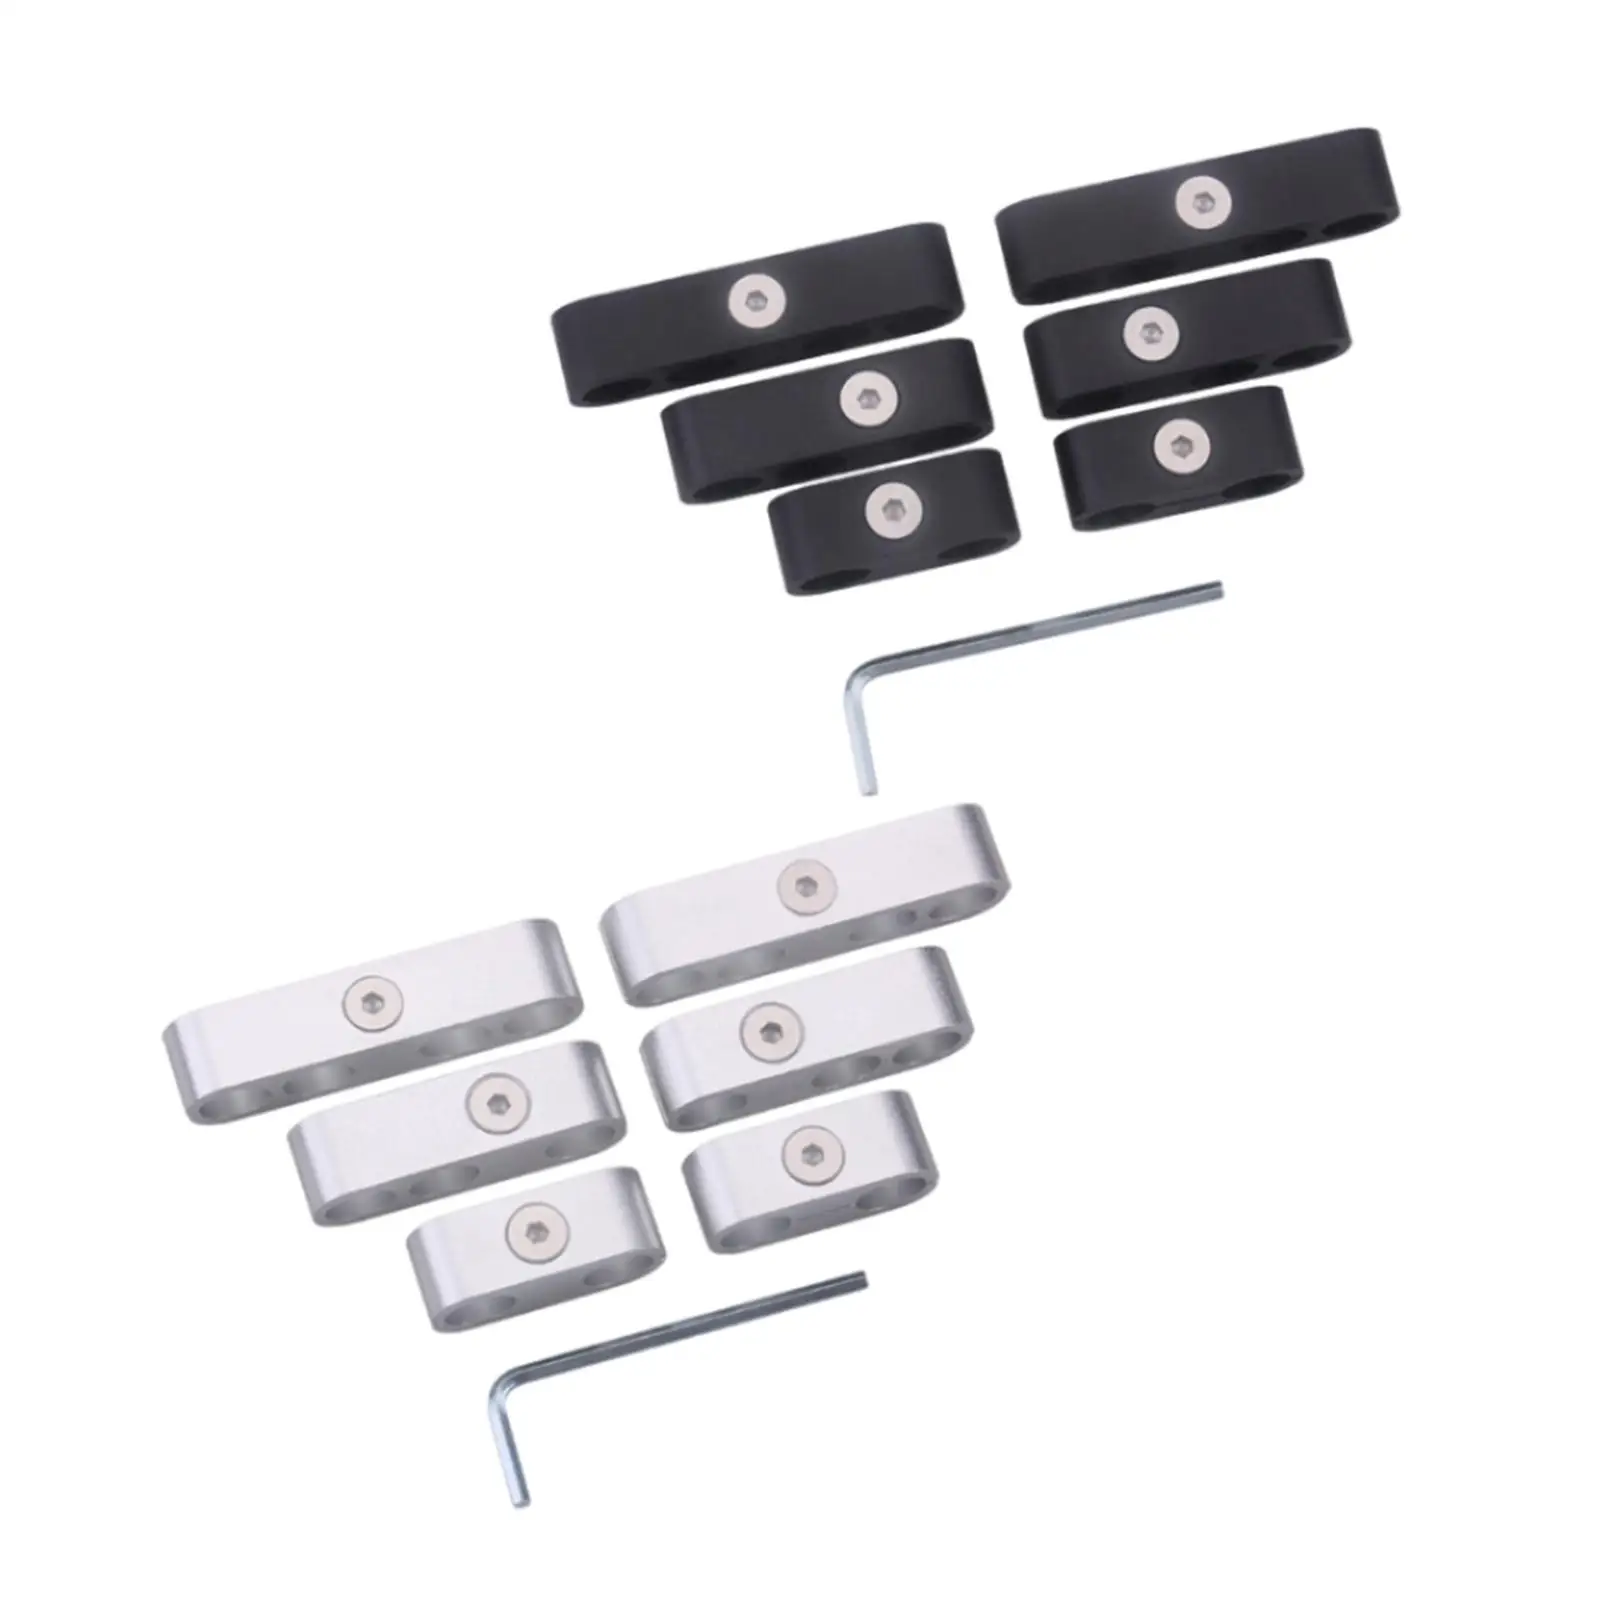 6x Engine Spark Plug Wire Separators Dividers Looms Easy to Install Accessories Durable High Performance with 1 Wrench